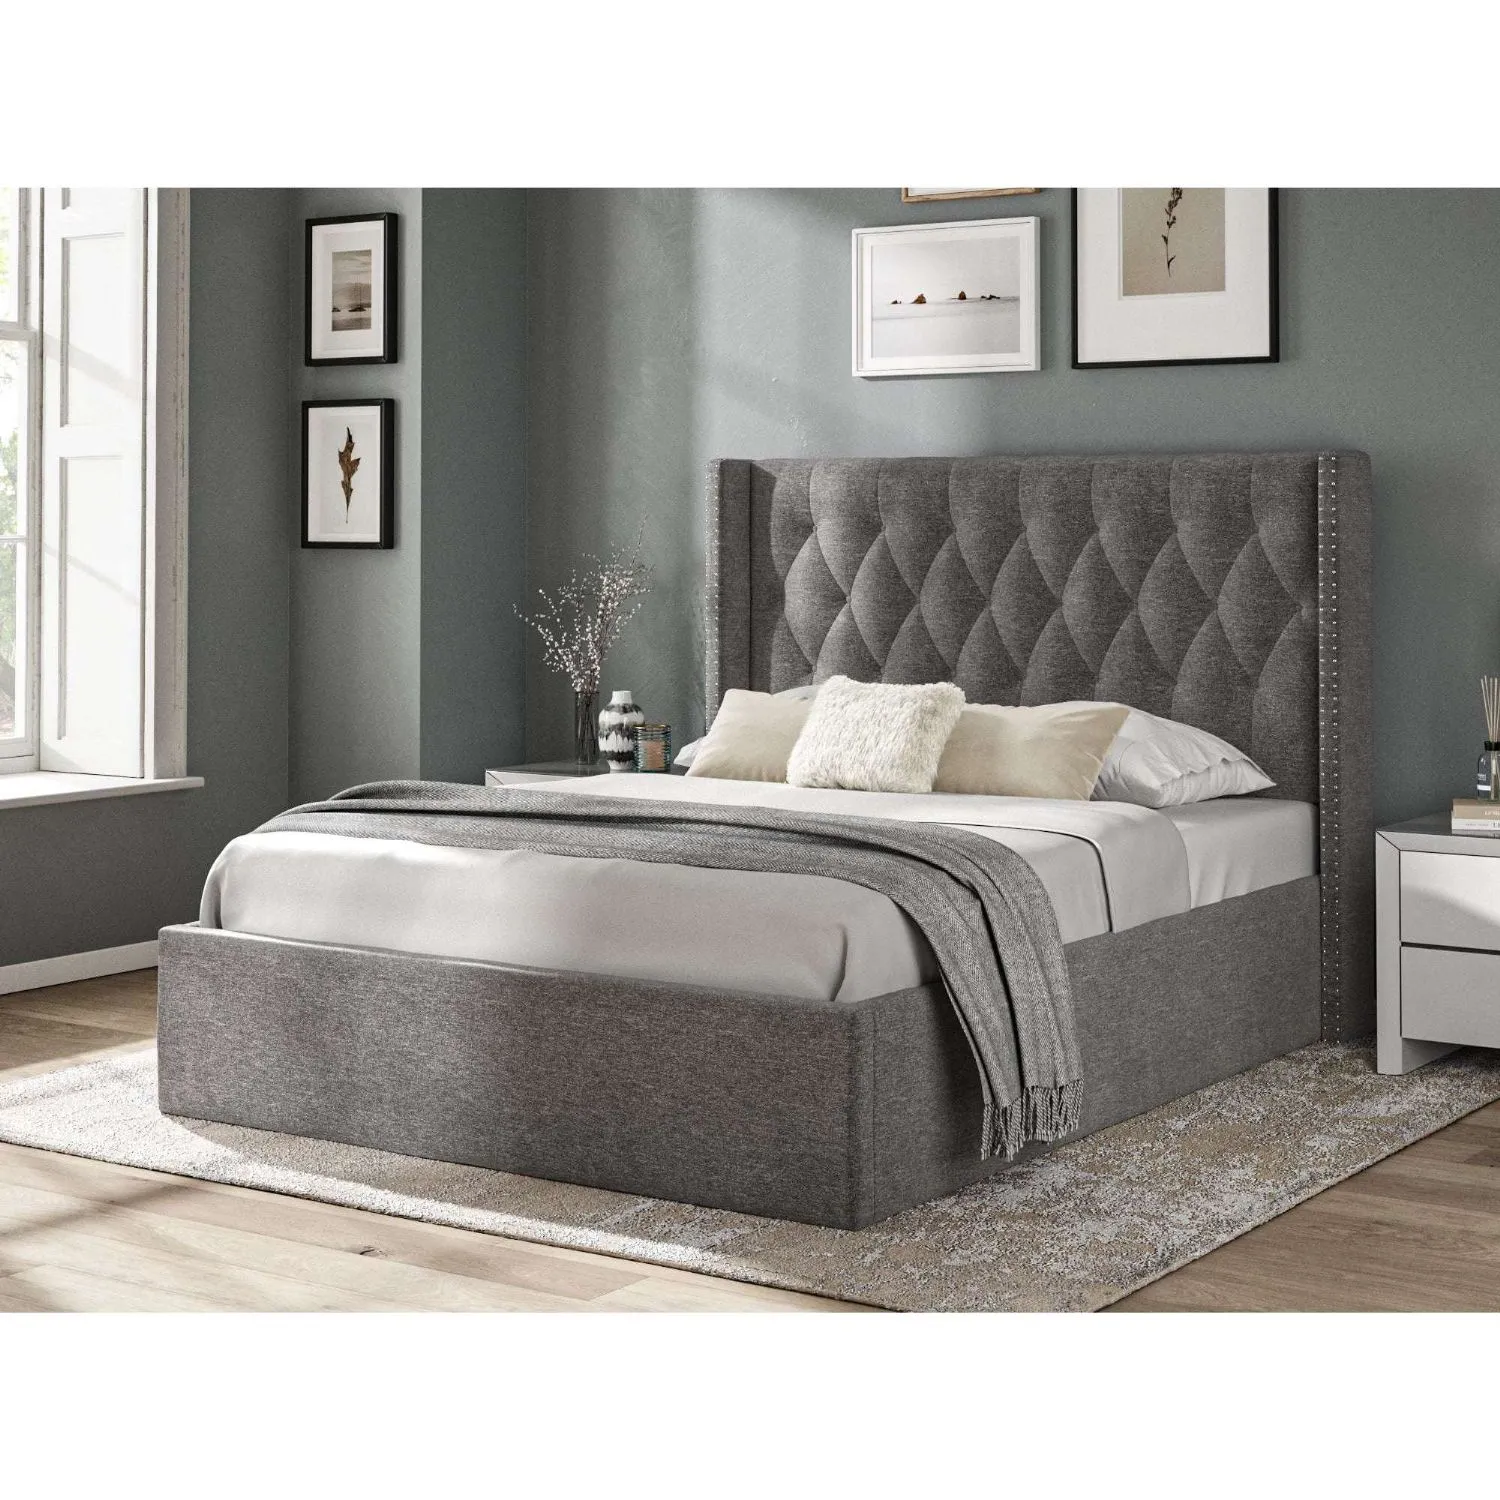 Fabric Bed Collection Dark Grey 4